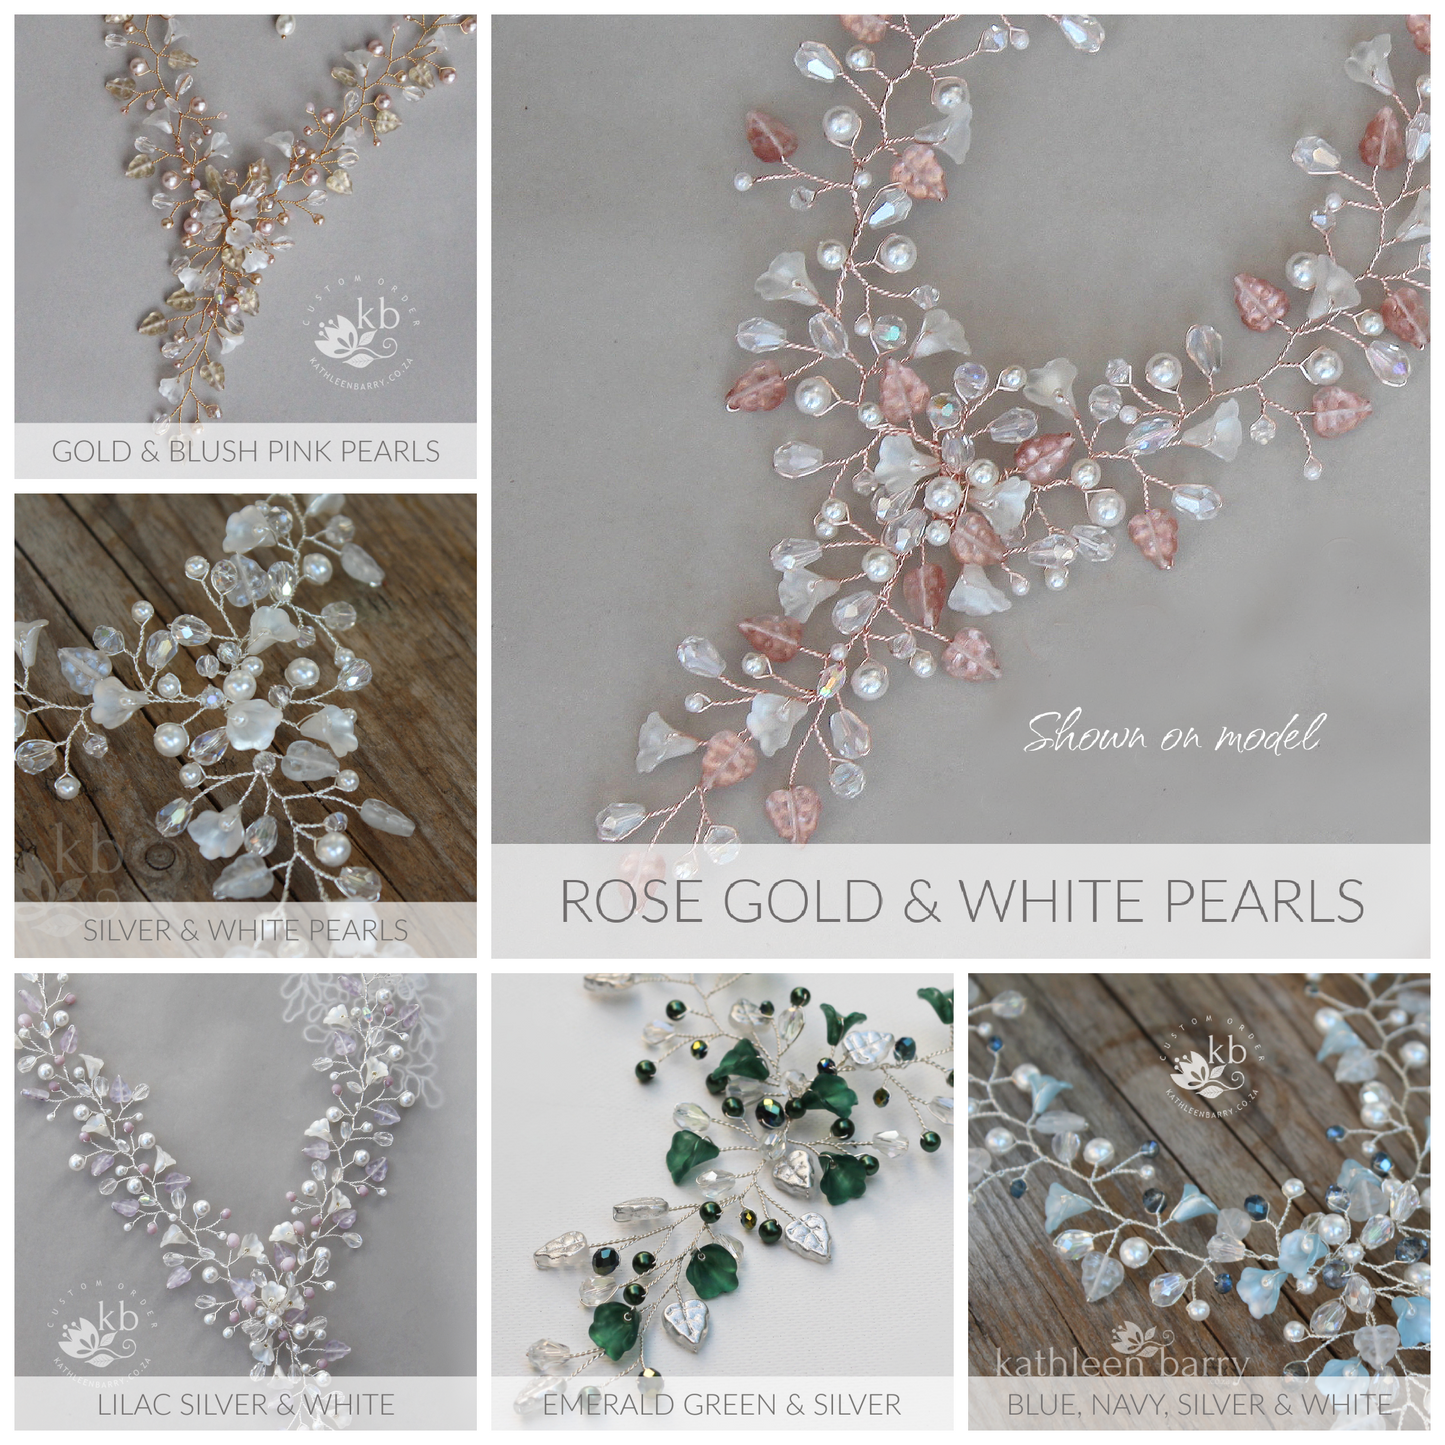 Nicole rose gold floral necklace - Organic crystal and pearls in rose gold, gold or silver finish